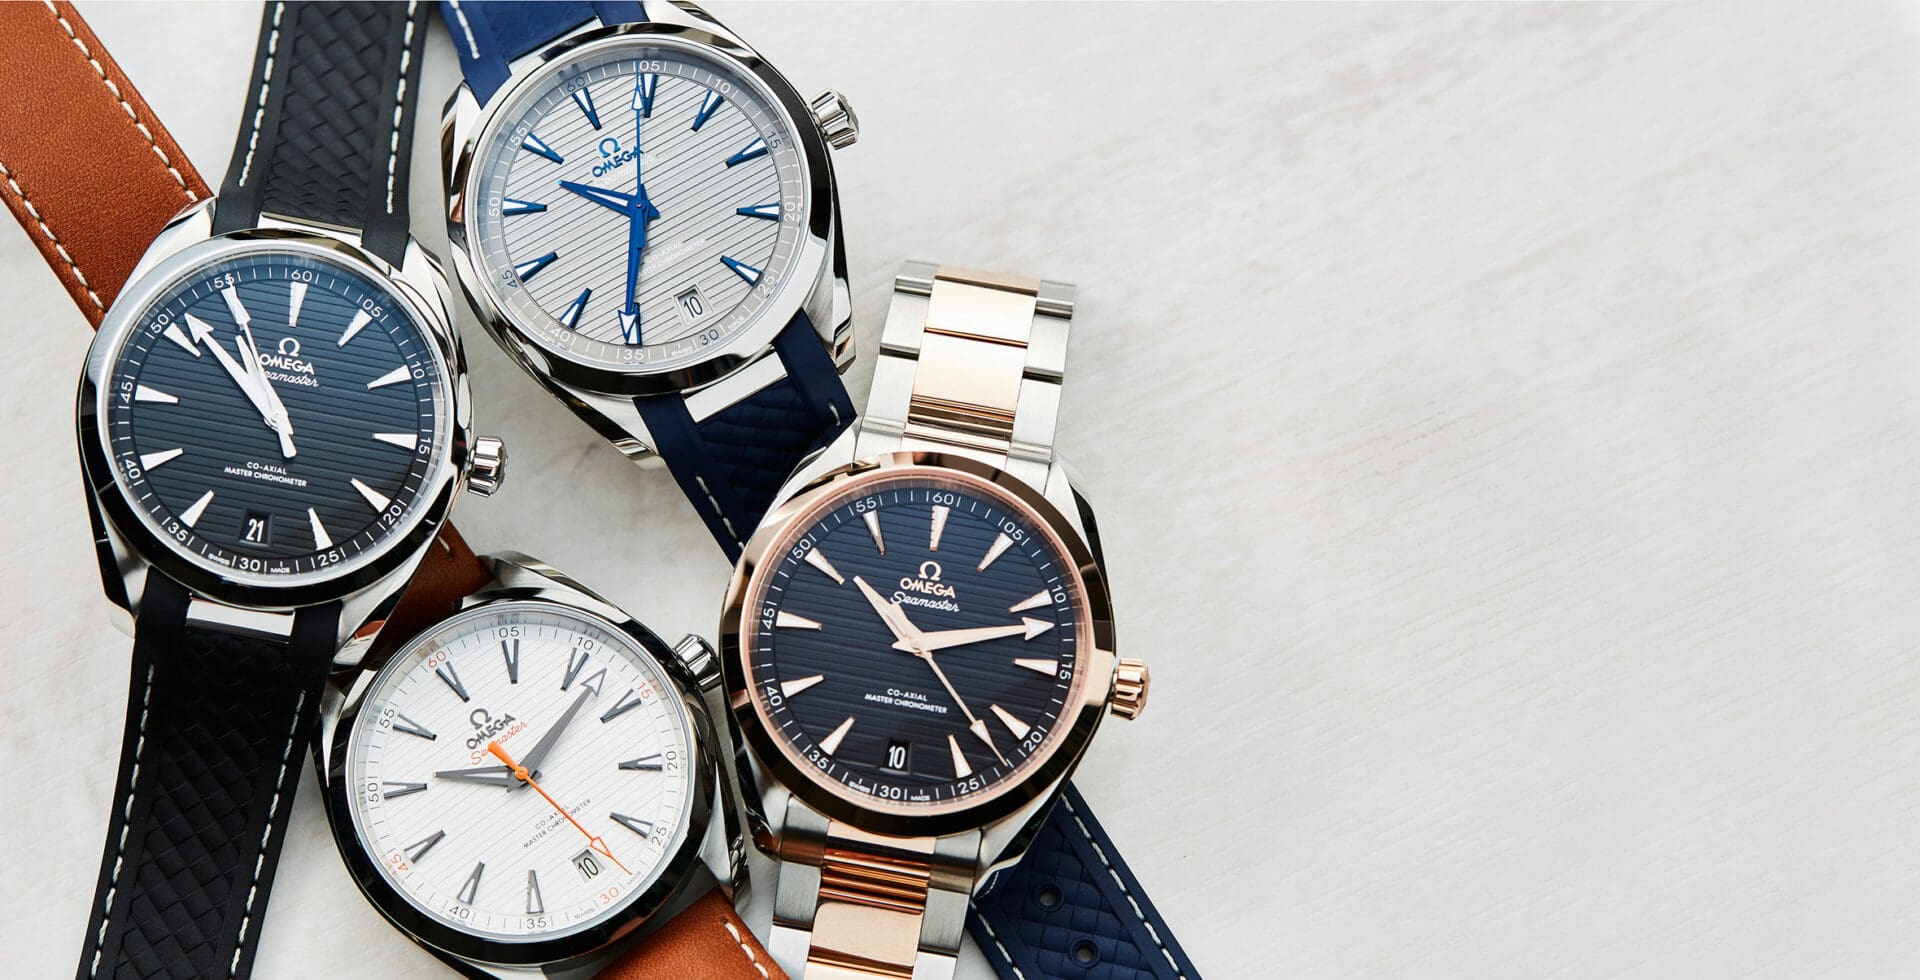 VIDEO: The Omega Seamaster Aqua Terra – is it the only watch you need? 